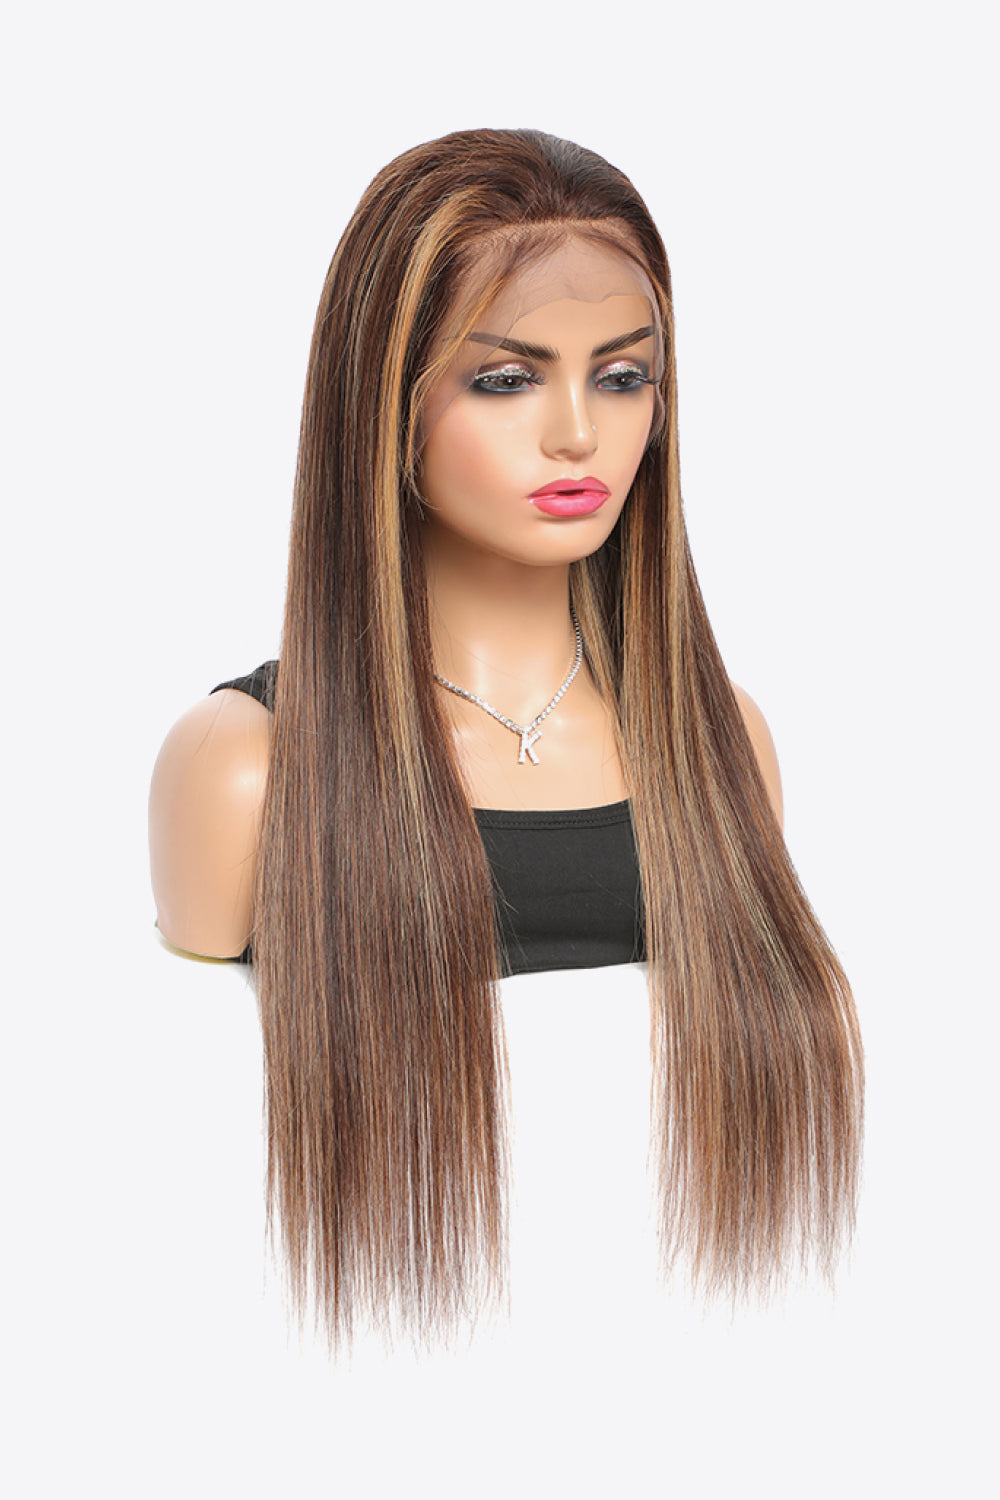 18" 160g  Highlight Ombre #P4/27 13x4 Lace Front Wigs Human Virgin Hair 150% Density - AllIn Computer